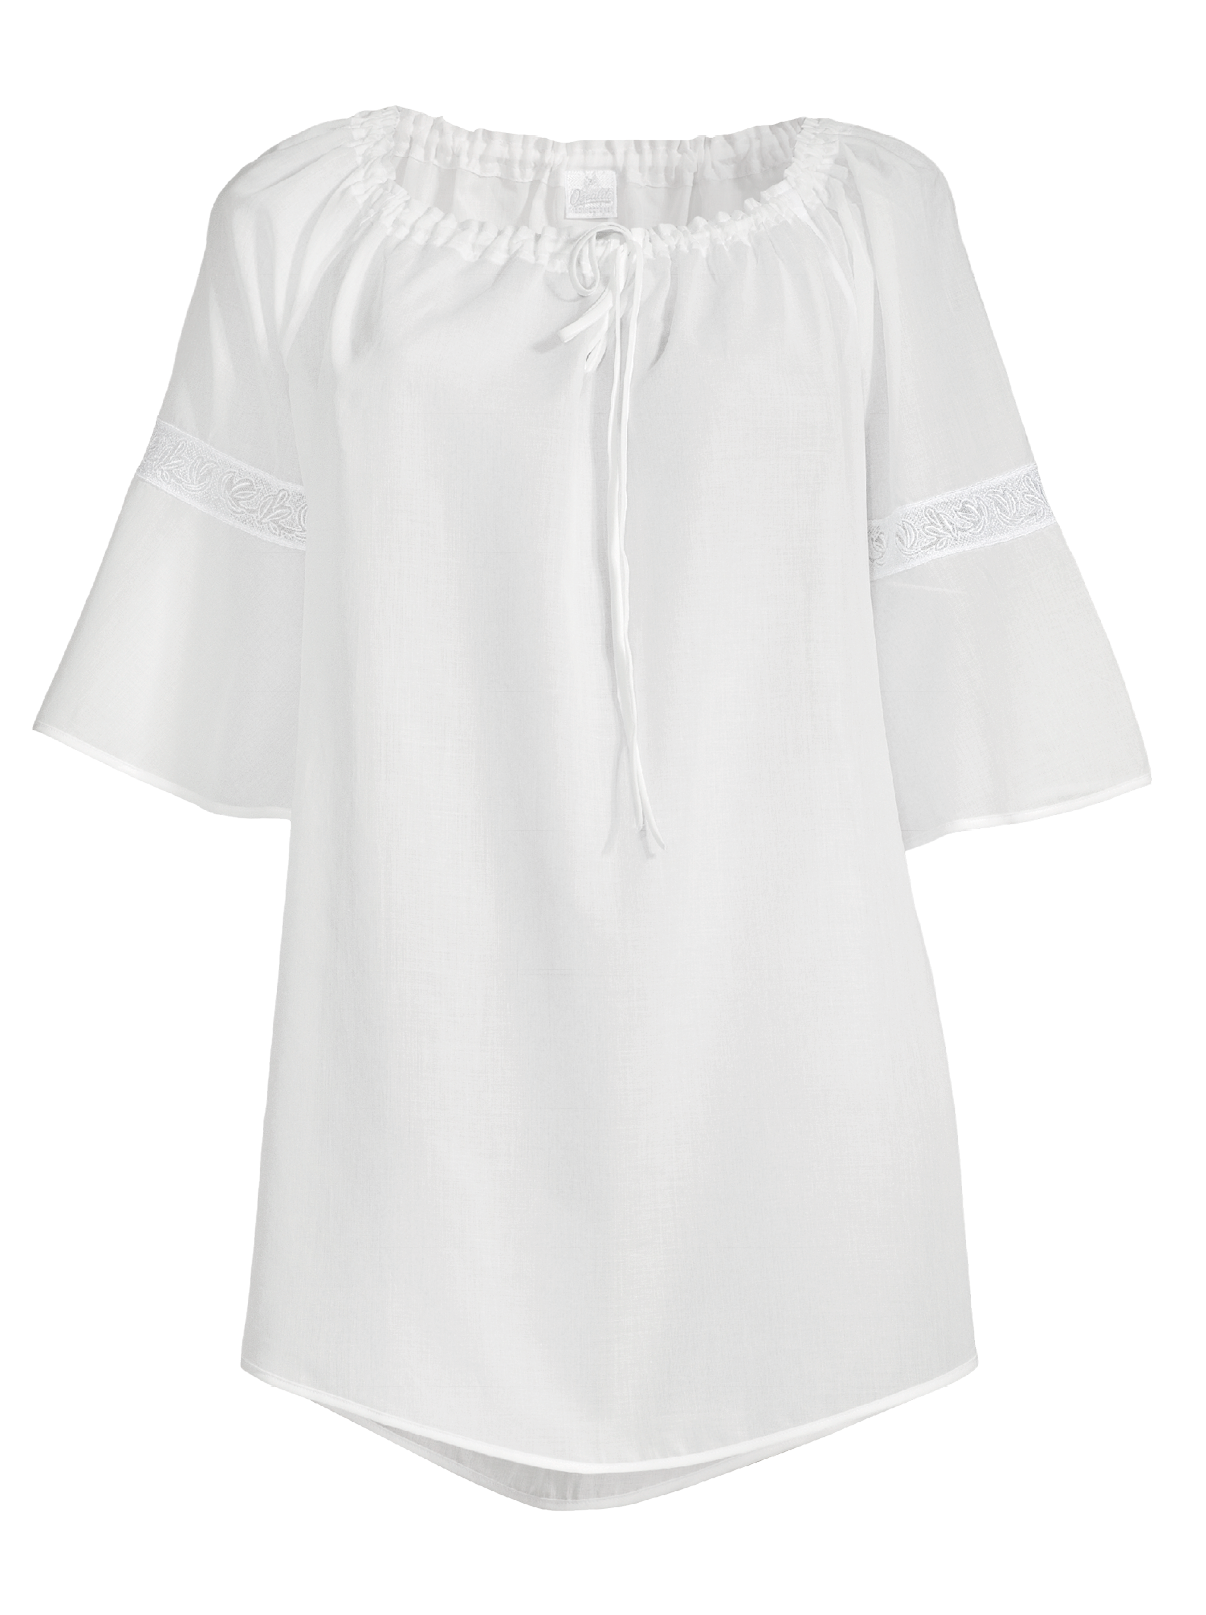 Longsleeves Mini dress in Voile Cotton 6566 - Oscalito